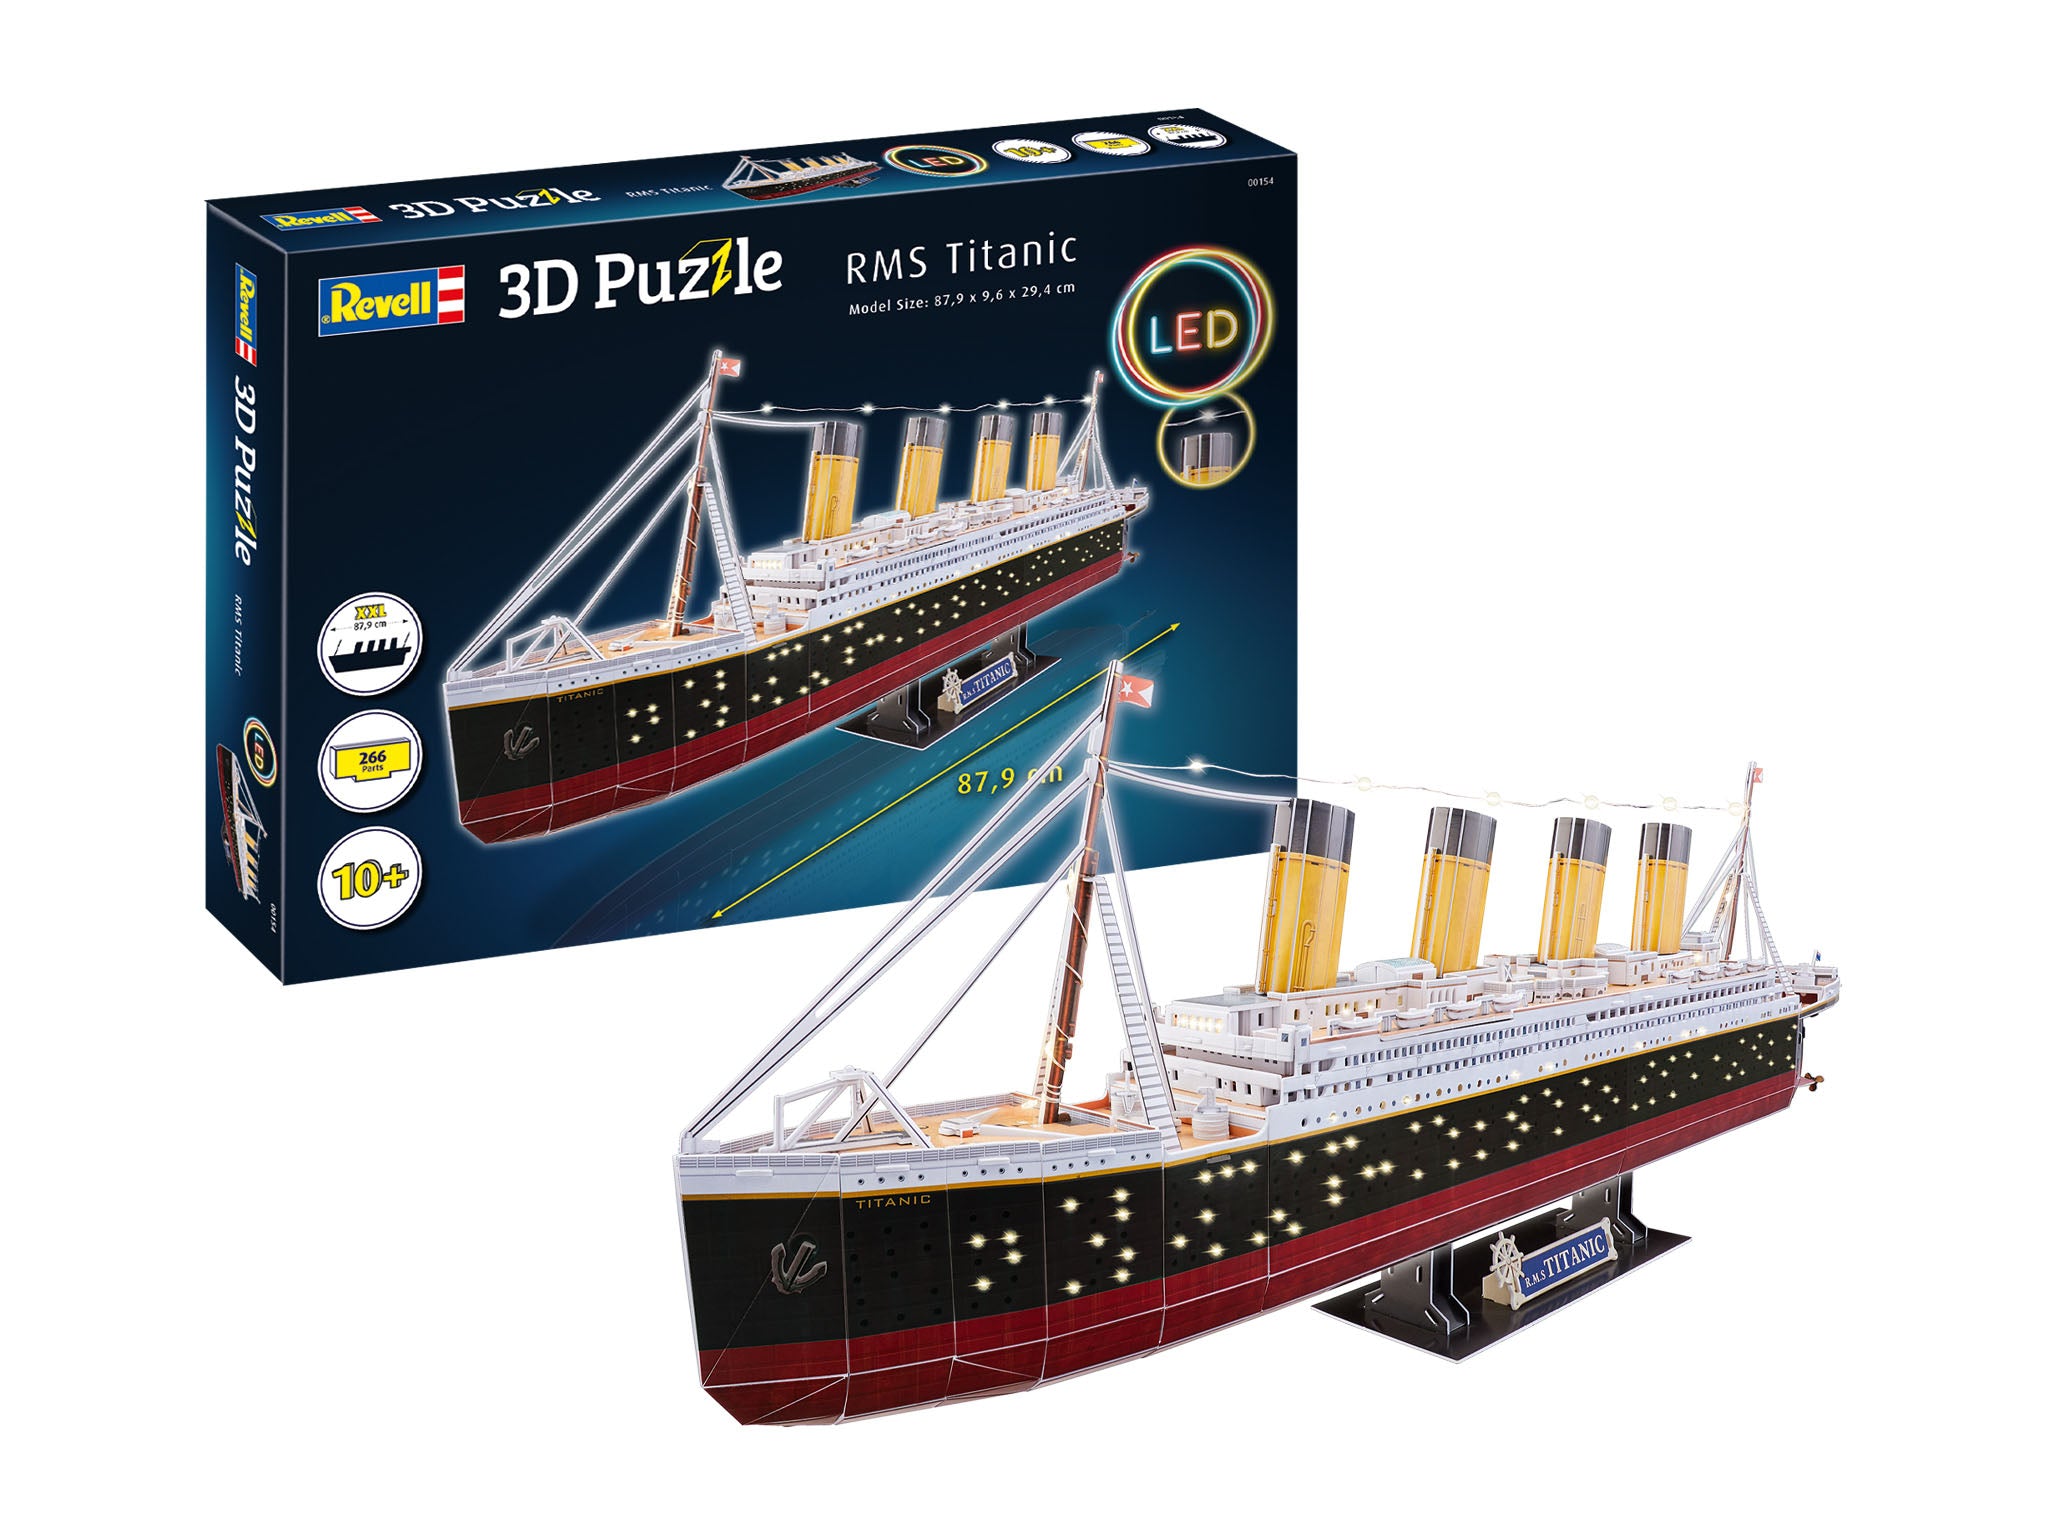 3D Puzzle Revell RMS Titanic - LED Edition